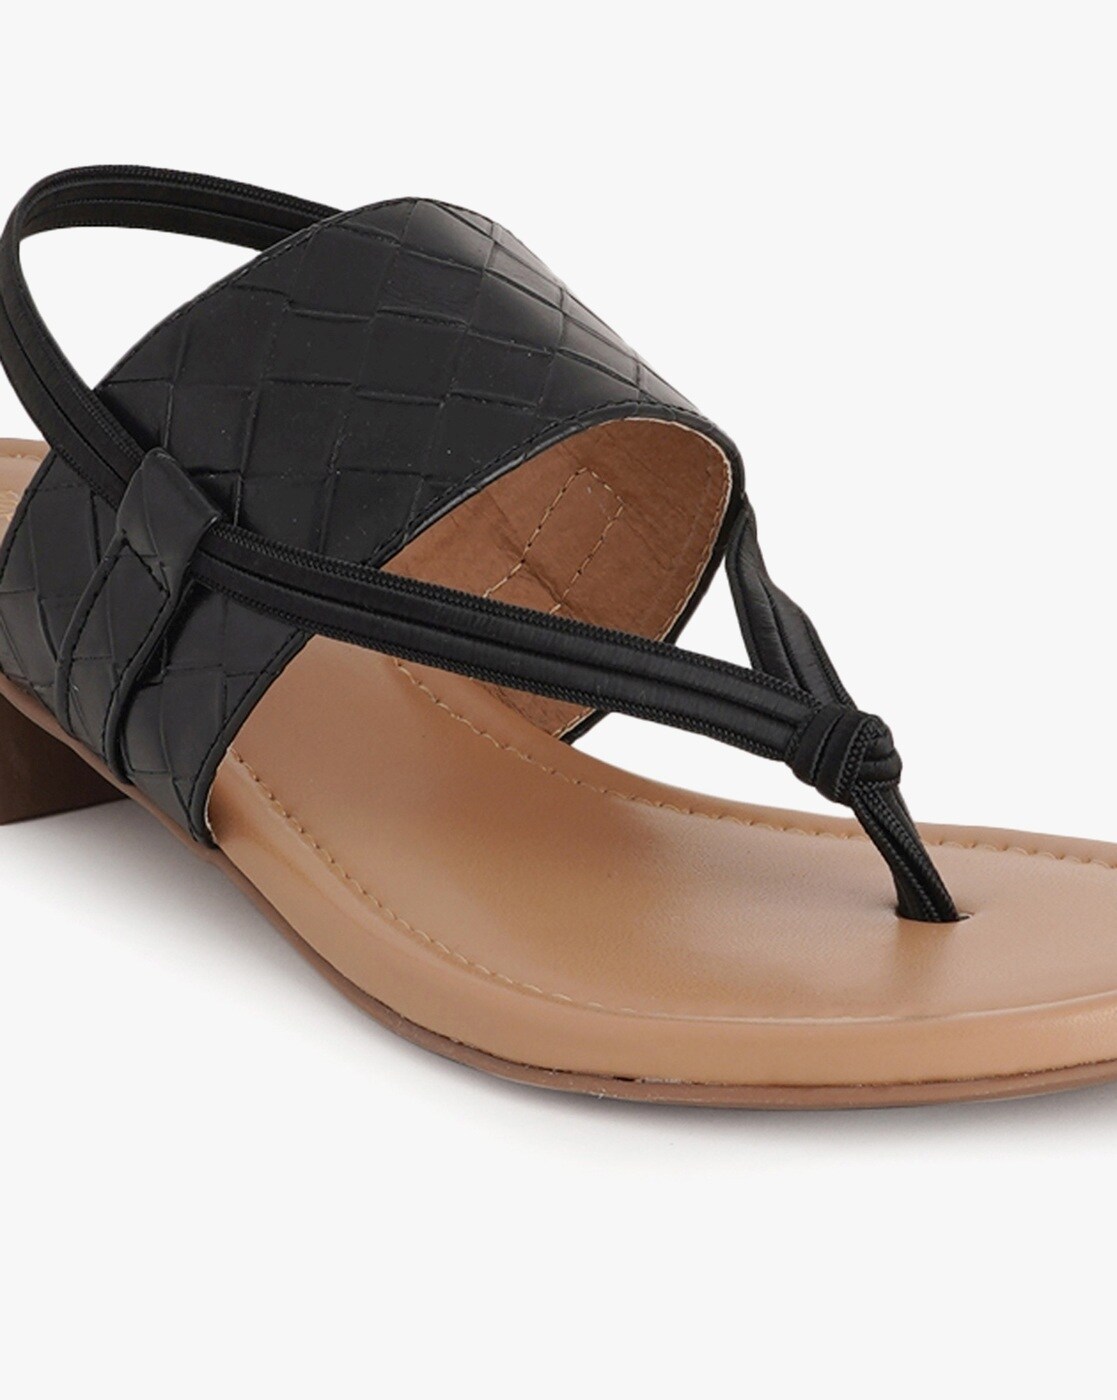 Buy Black Flat Sandals for Women by Steppings Online